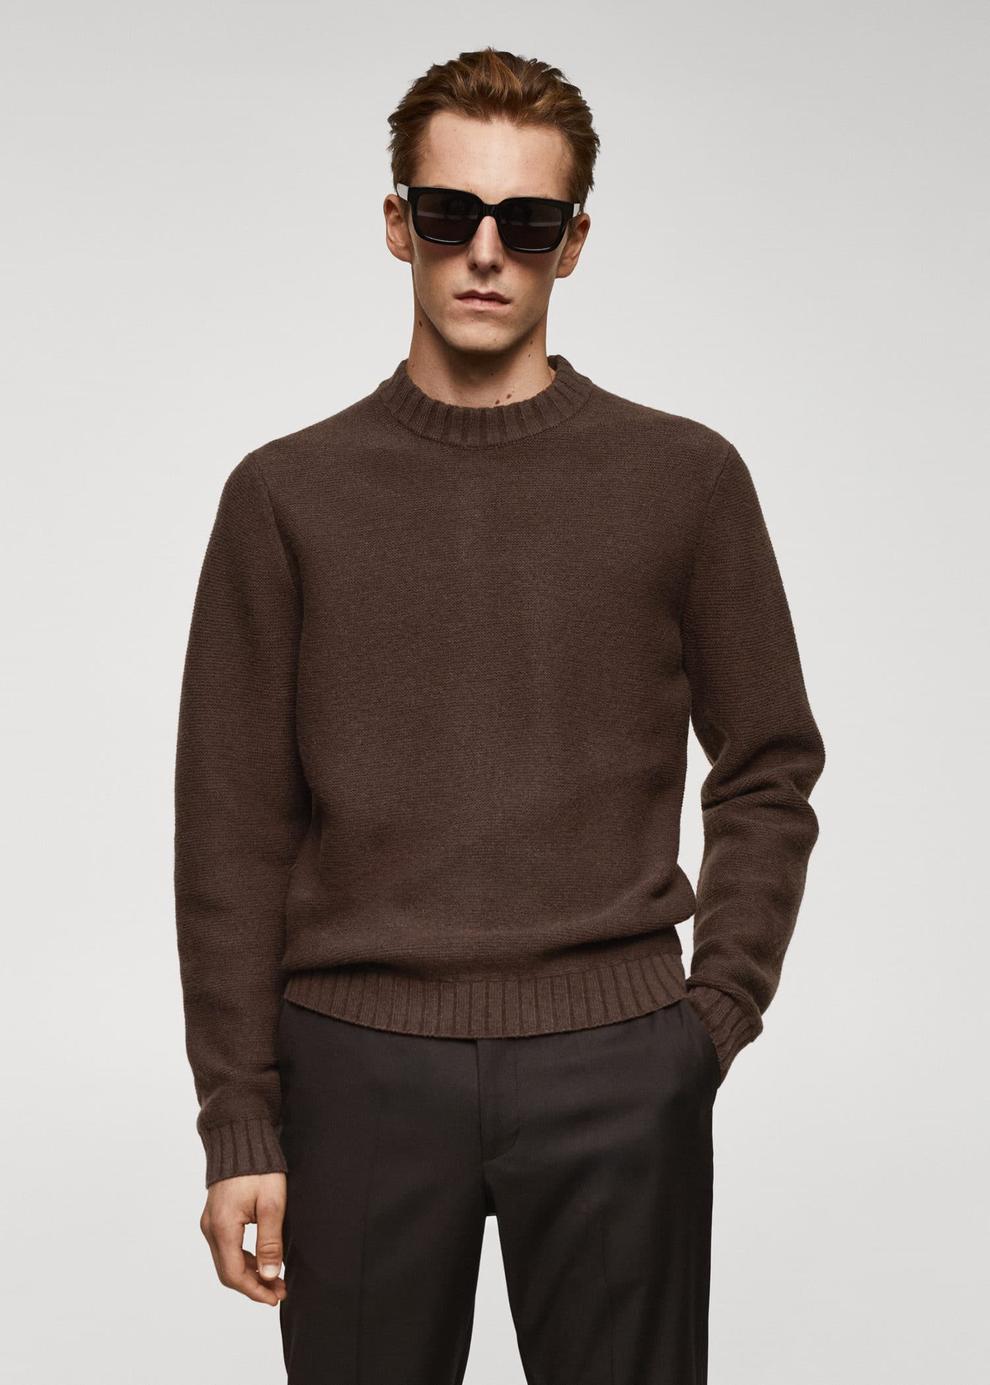 Knitted sweater with ribbed details offers at S$ 89.9 in HE by Mango